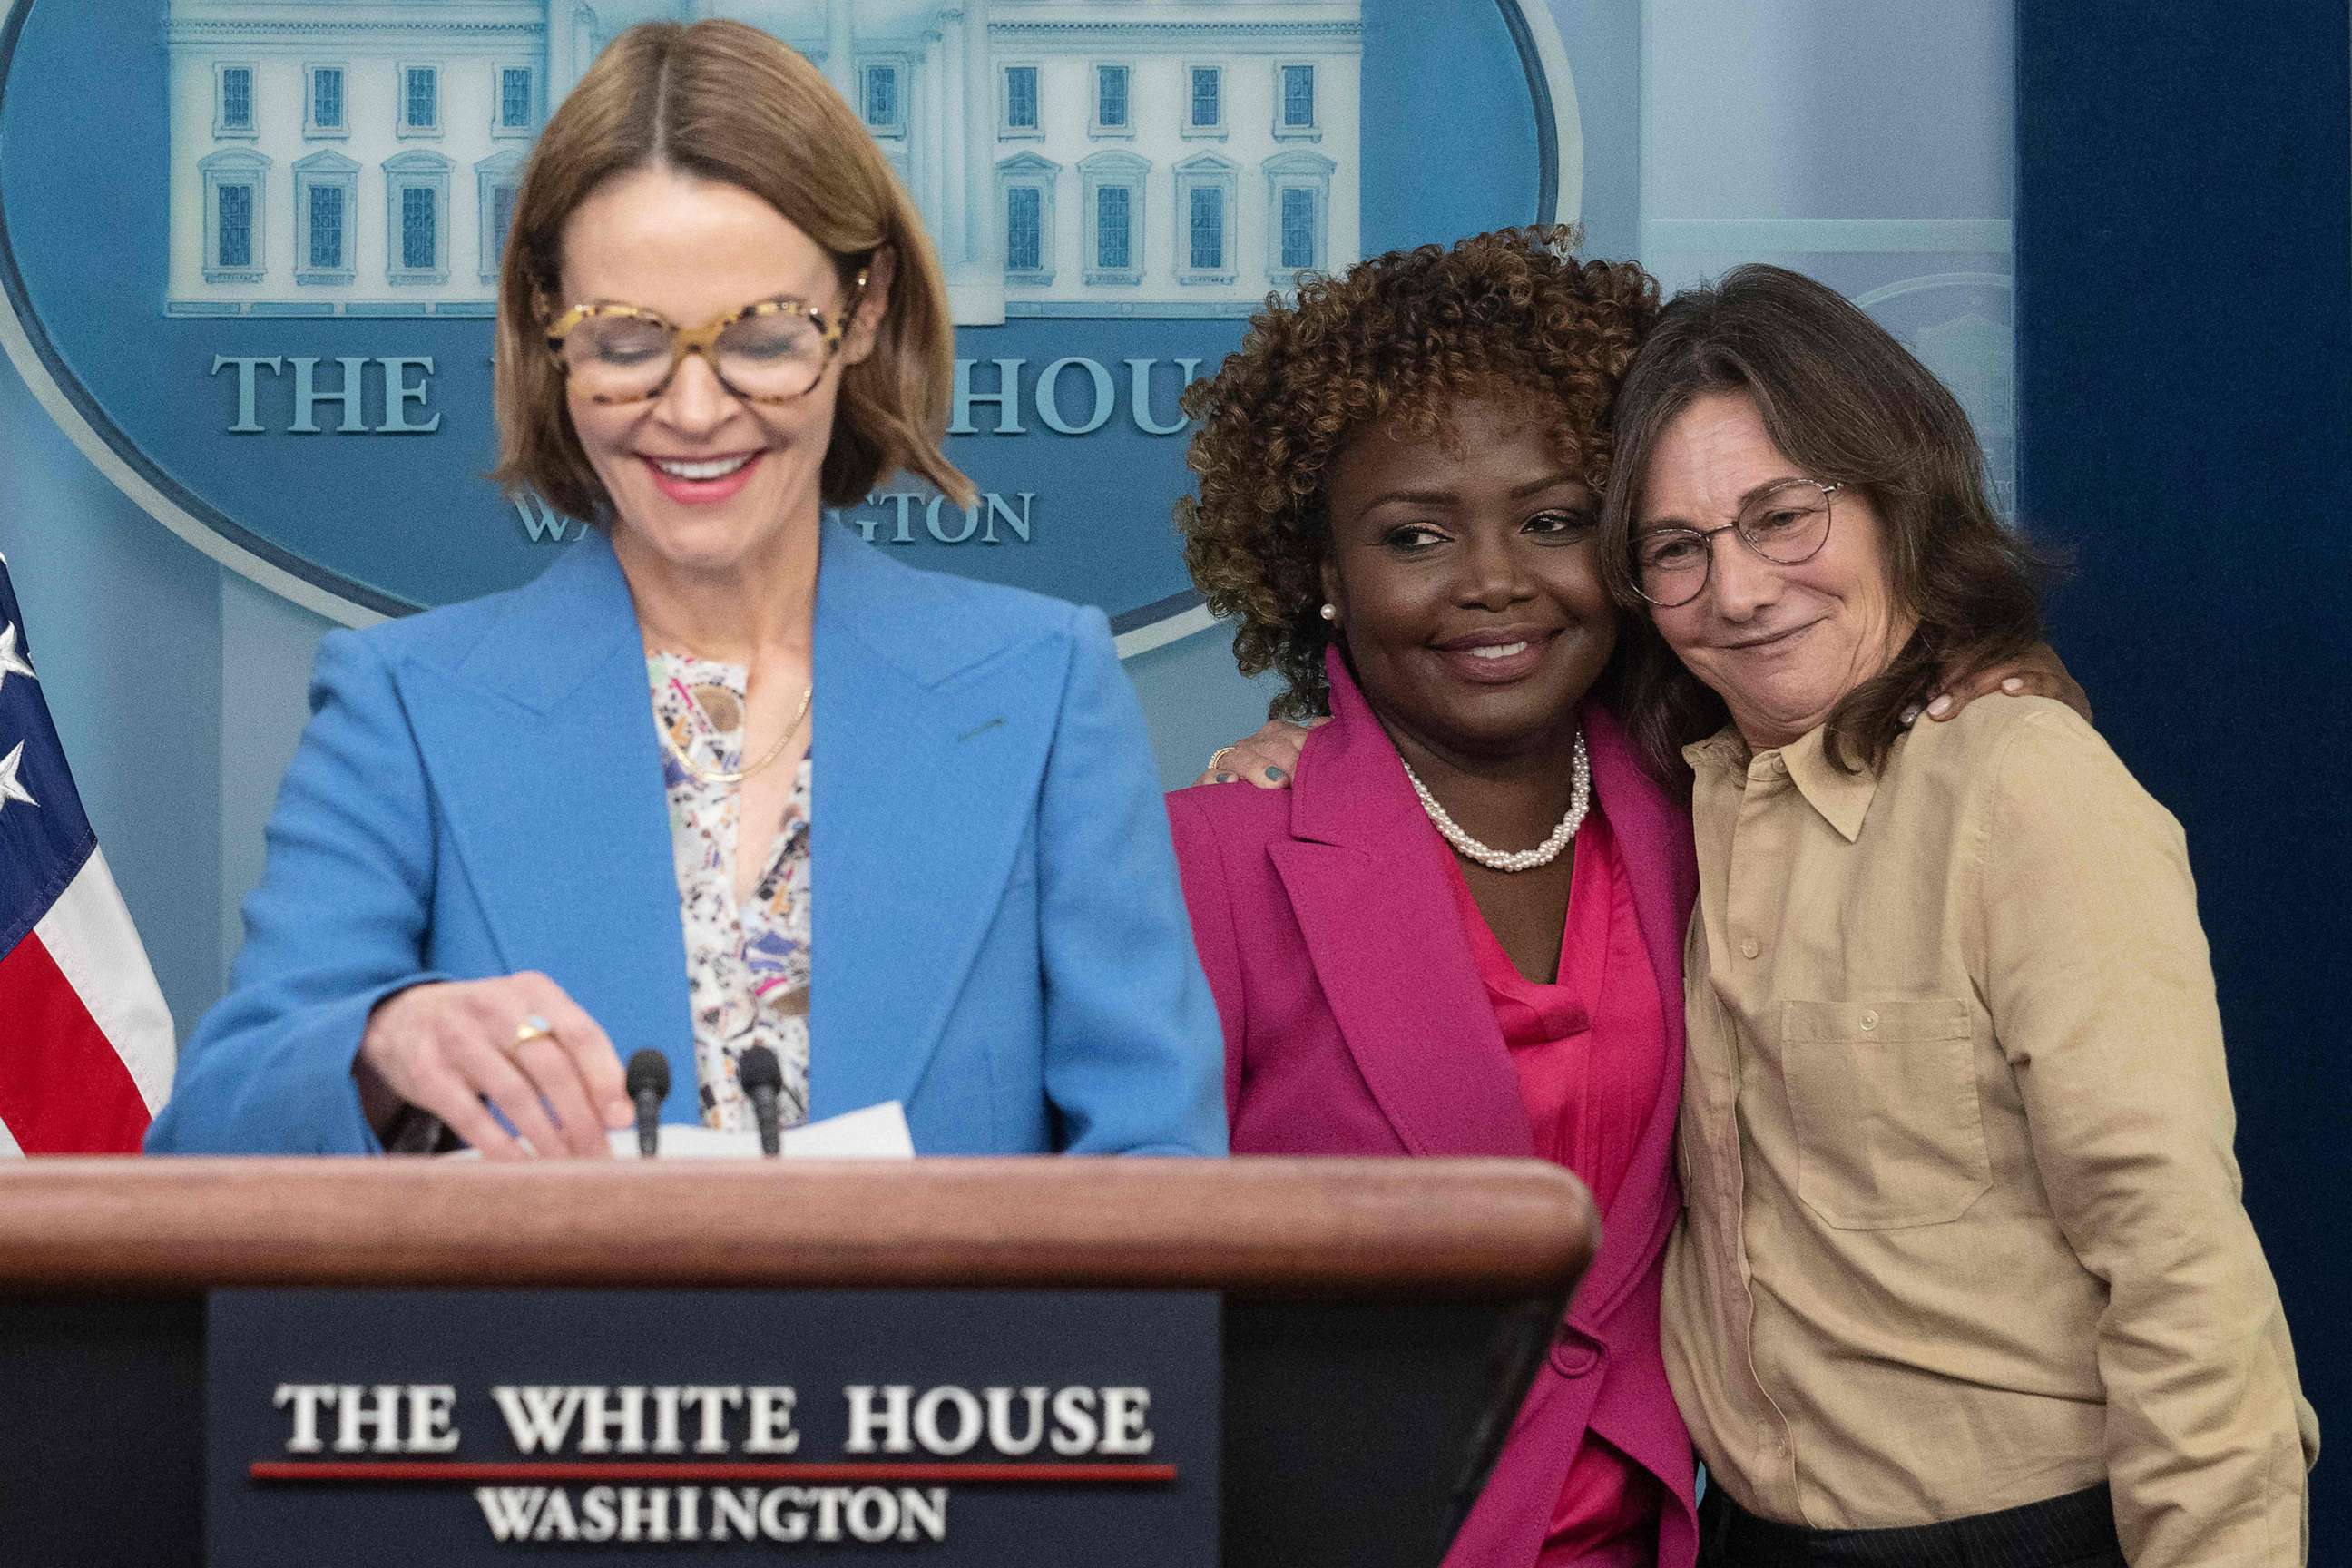 PHOTO: White House Press Secretary Karine Jean-Pierre is hugged by television producer Ilene Chaiken (R) as actress and musician Leisha Hailey (L) speaks during the daily briefing in Washington, D.C., on April 25, 2023.